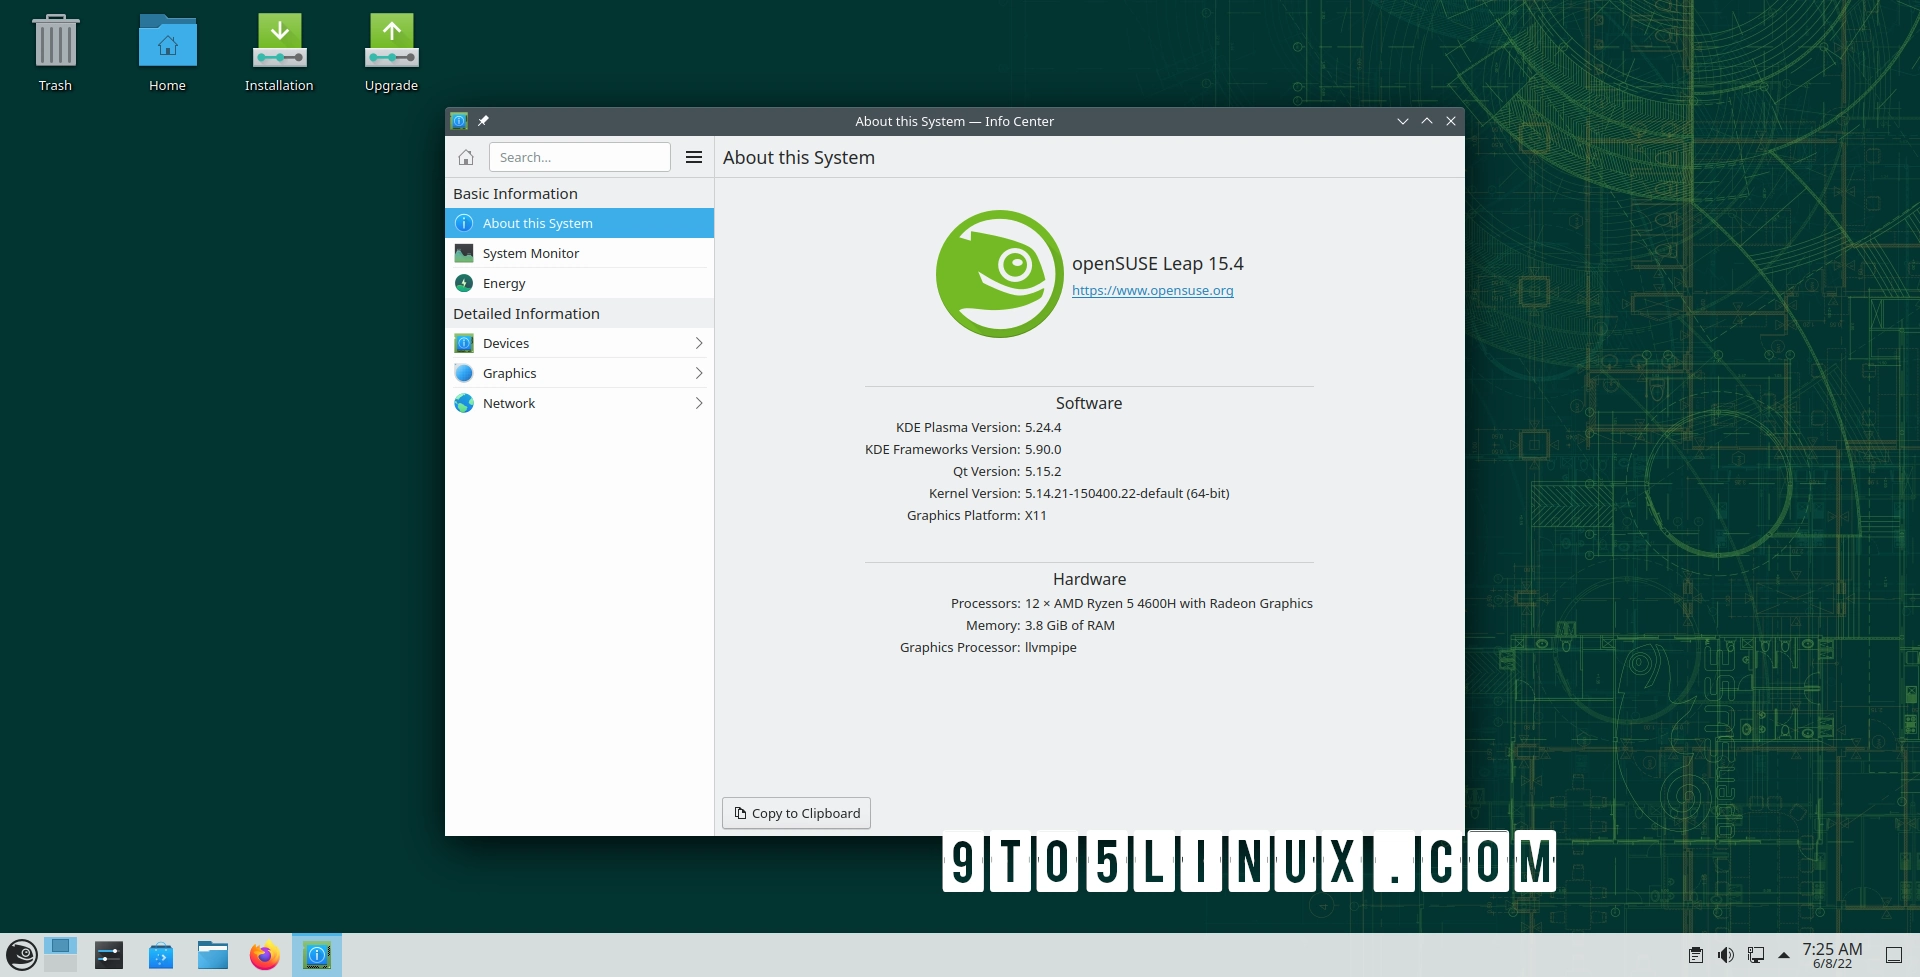 openSUSE Leap 15.4 Officially Released, This Is What’s New